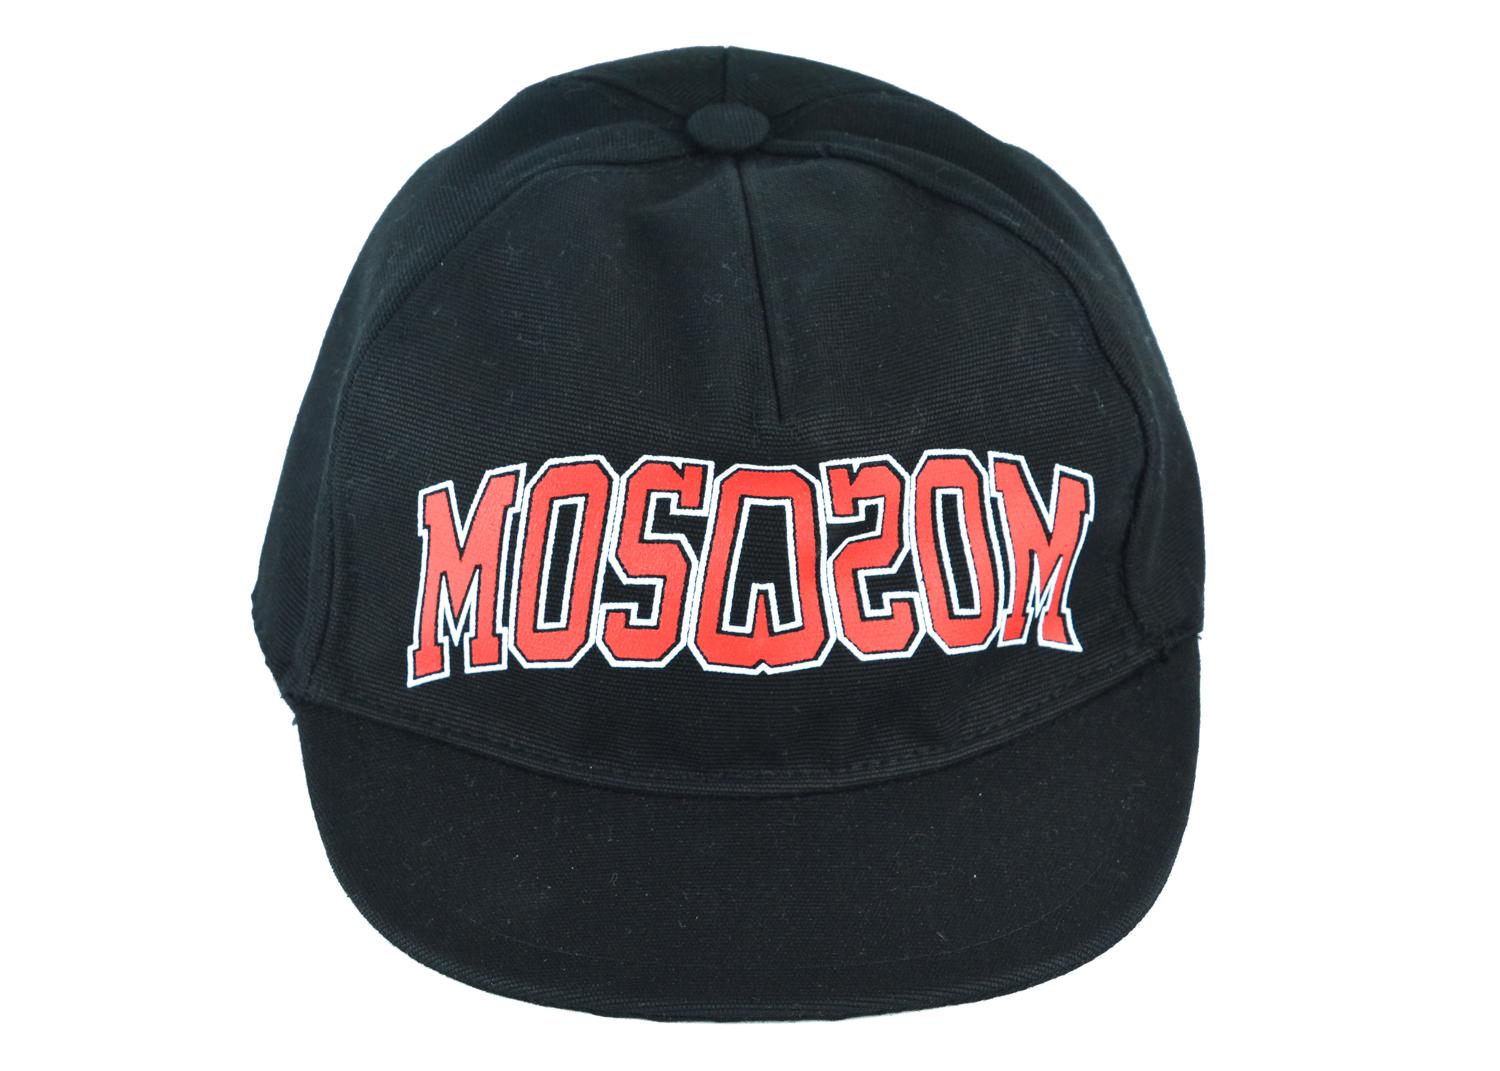 Moschino all black varsity logo cap. This cap features an all black color with red and white varsity letter logo in the front. This cap is perfect for an everyday wear and fits comfortably around the head. Pair with regular denim and an oversized